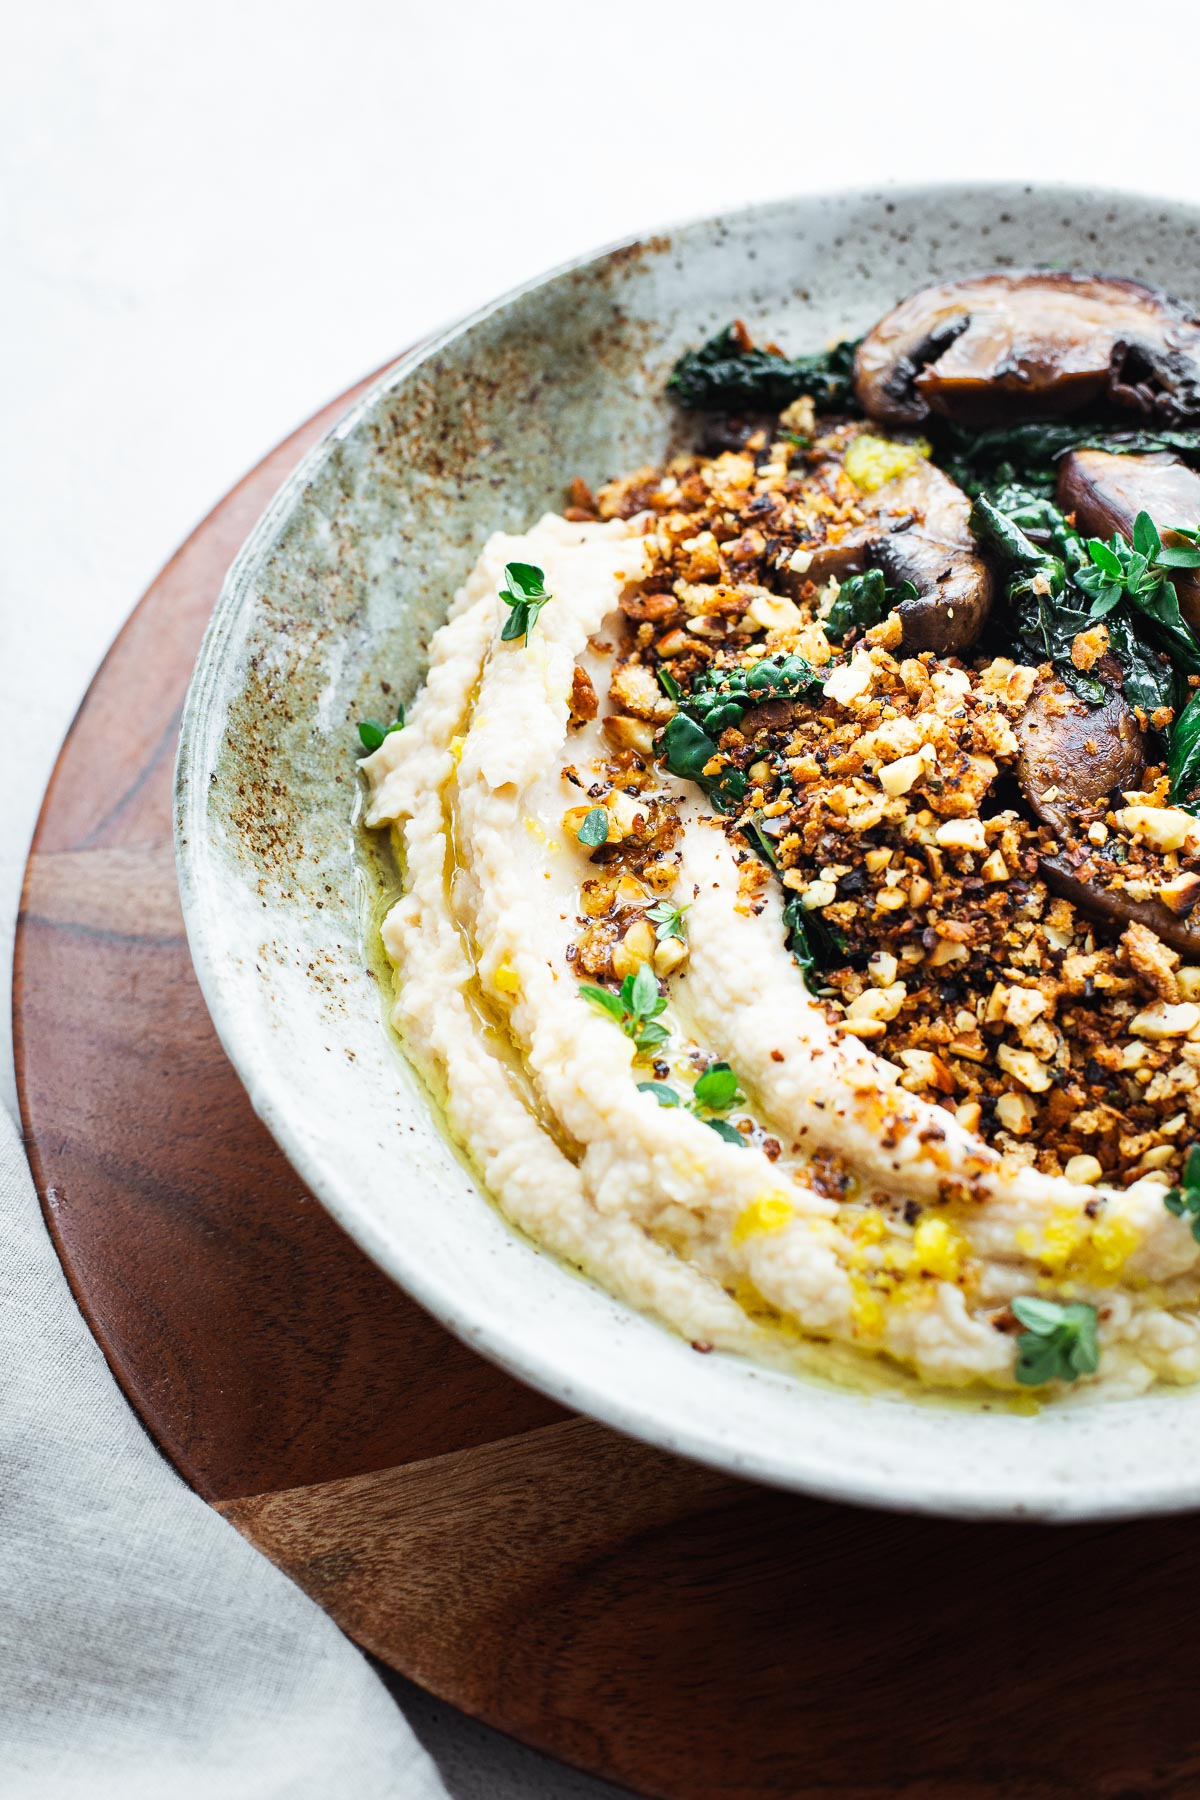 Butter bean mash (pureed butter beans) with crunchy almond bread crumbs and sautéed mushrooms and black kale.